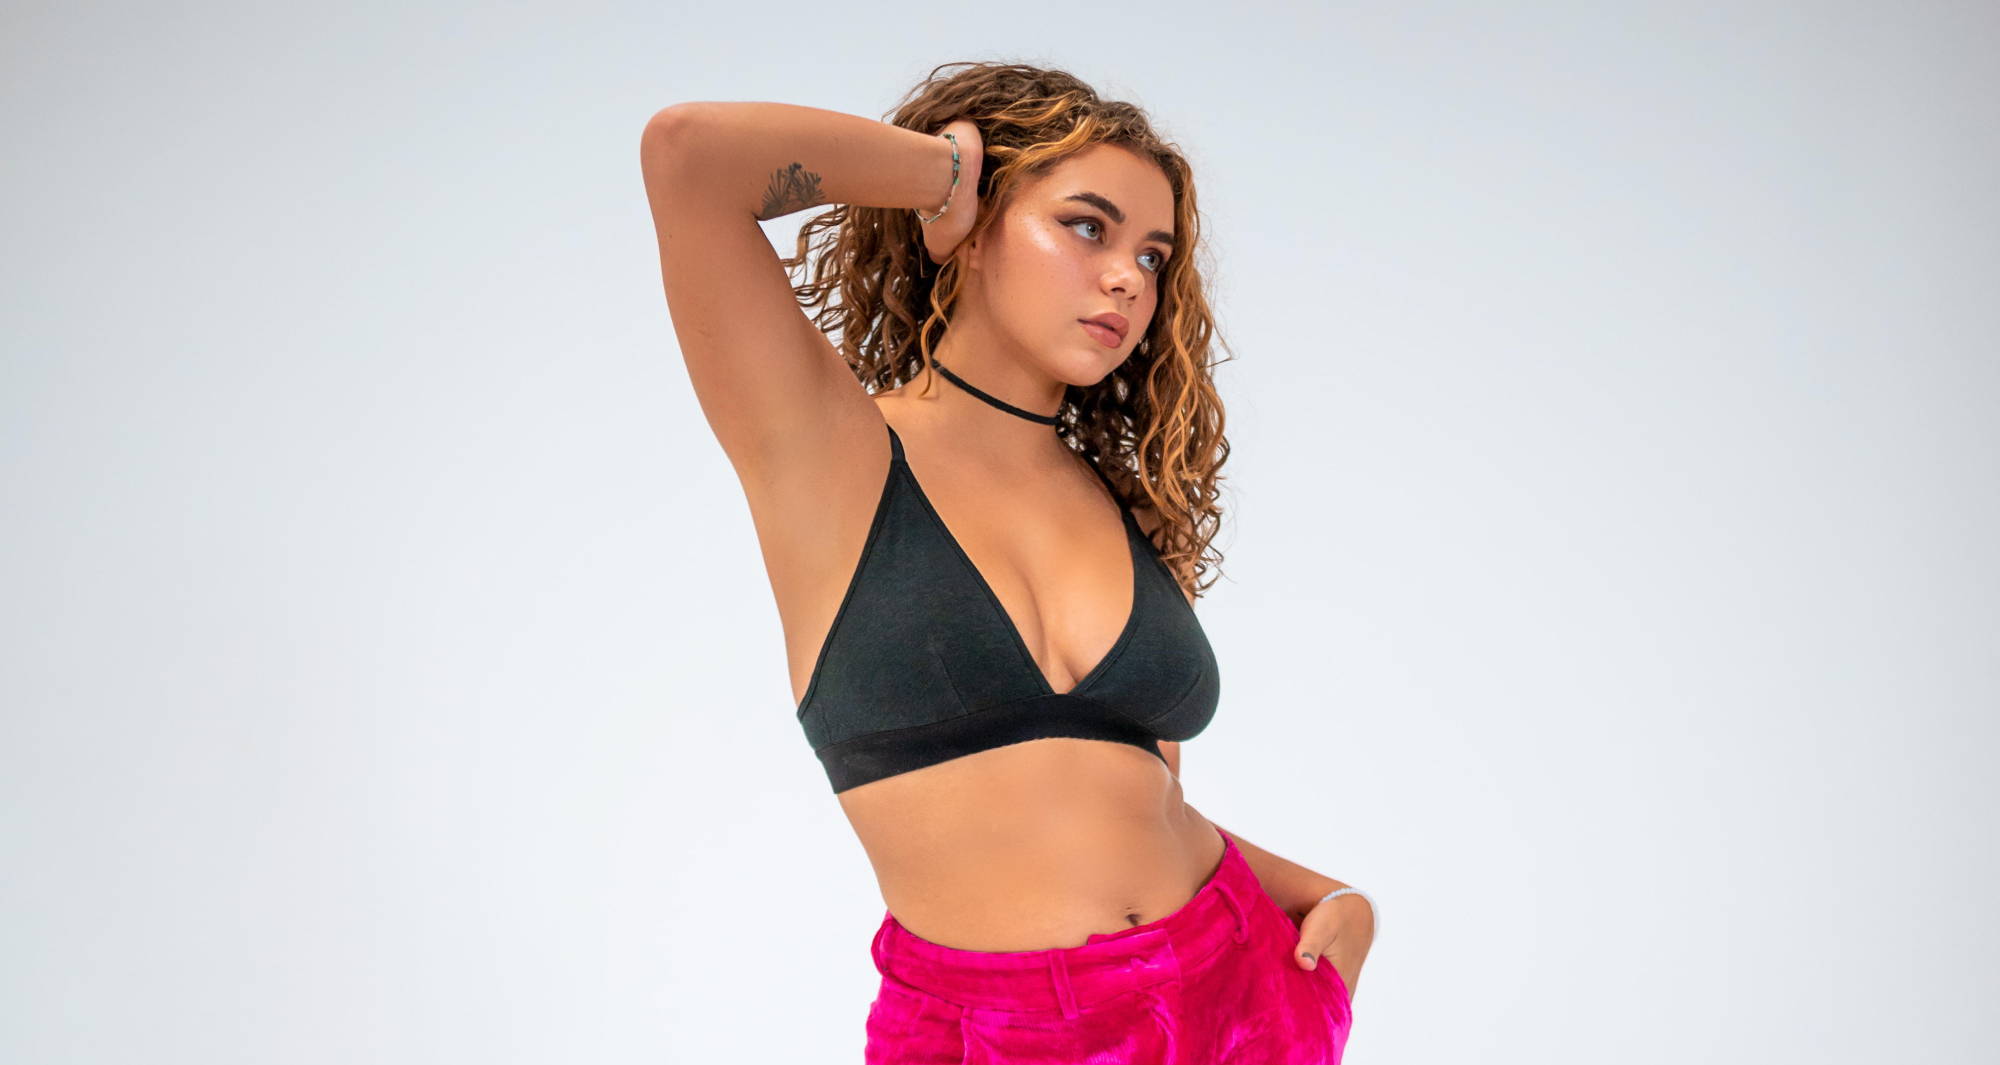 A woman with curly hair wearing a black bralette and pink pants poses in front of a white background